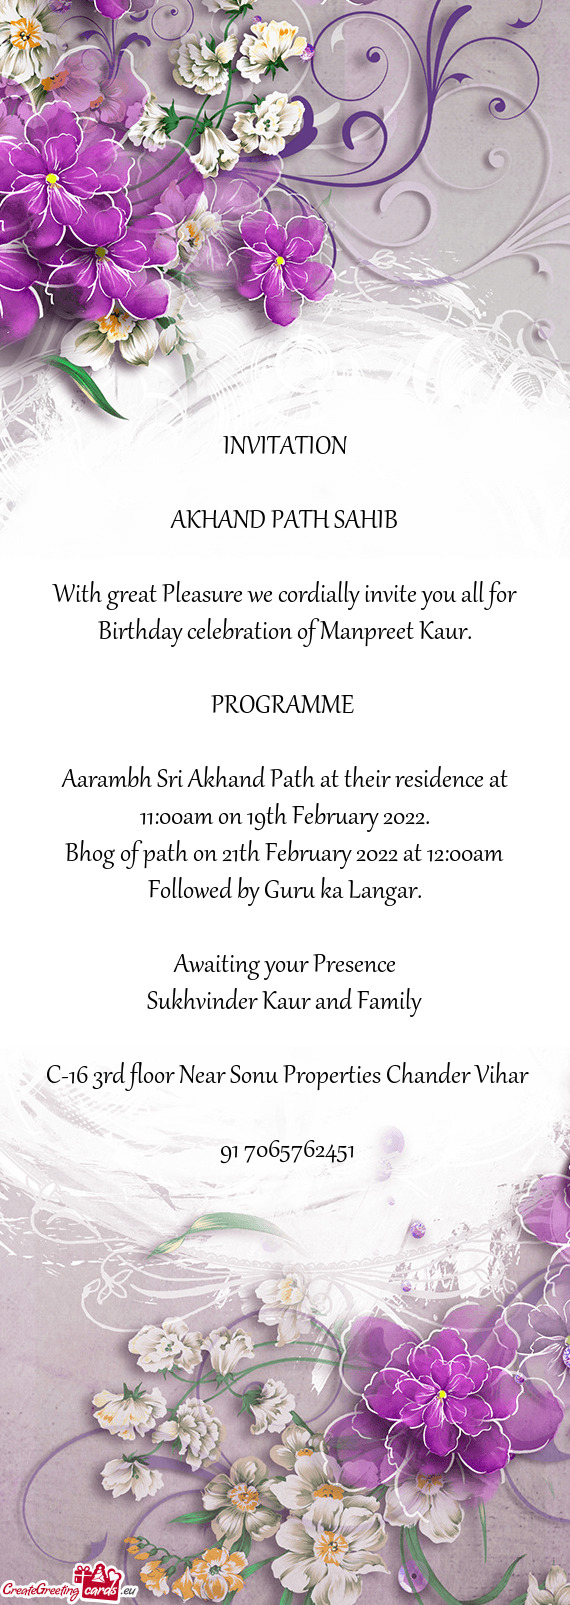 With great Pleasure we cordially invite you all for Birthday celebration of Manpreet Kaur